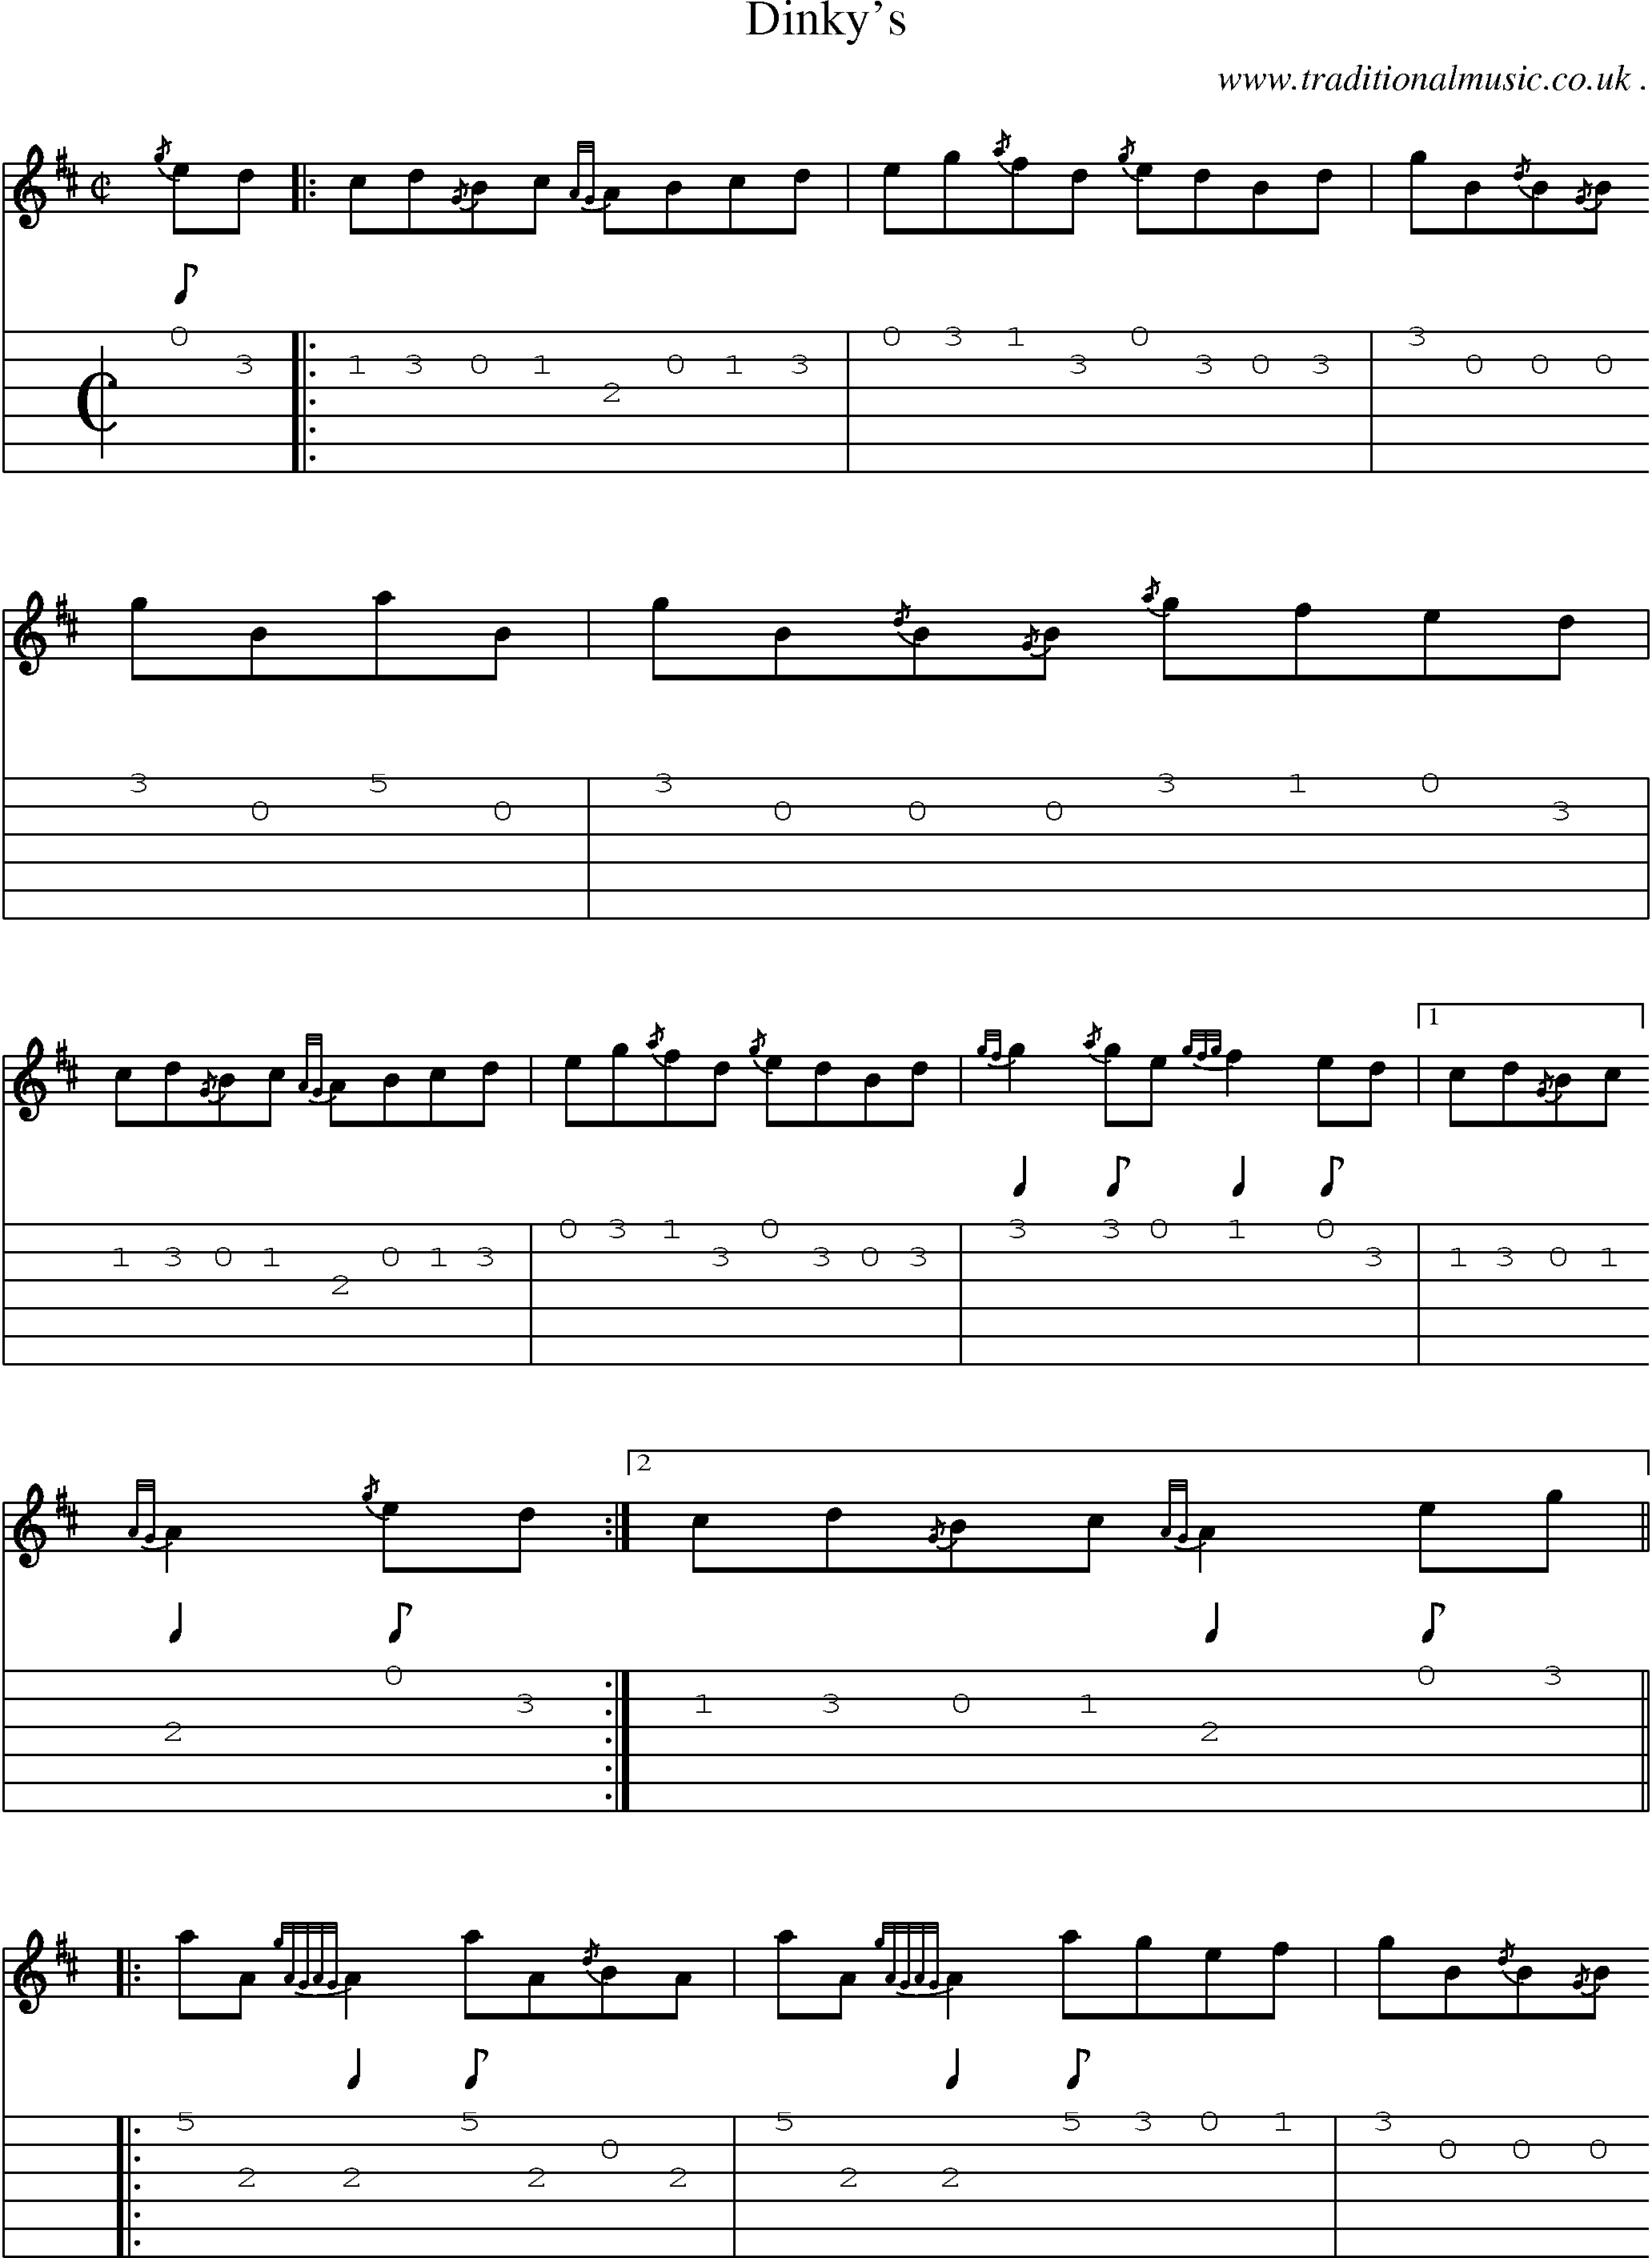 Sheet-music  score, Chords and Guitar Tabs for Dinkys